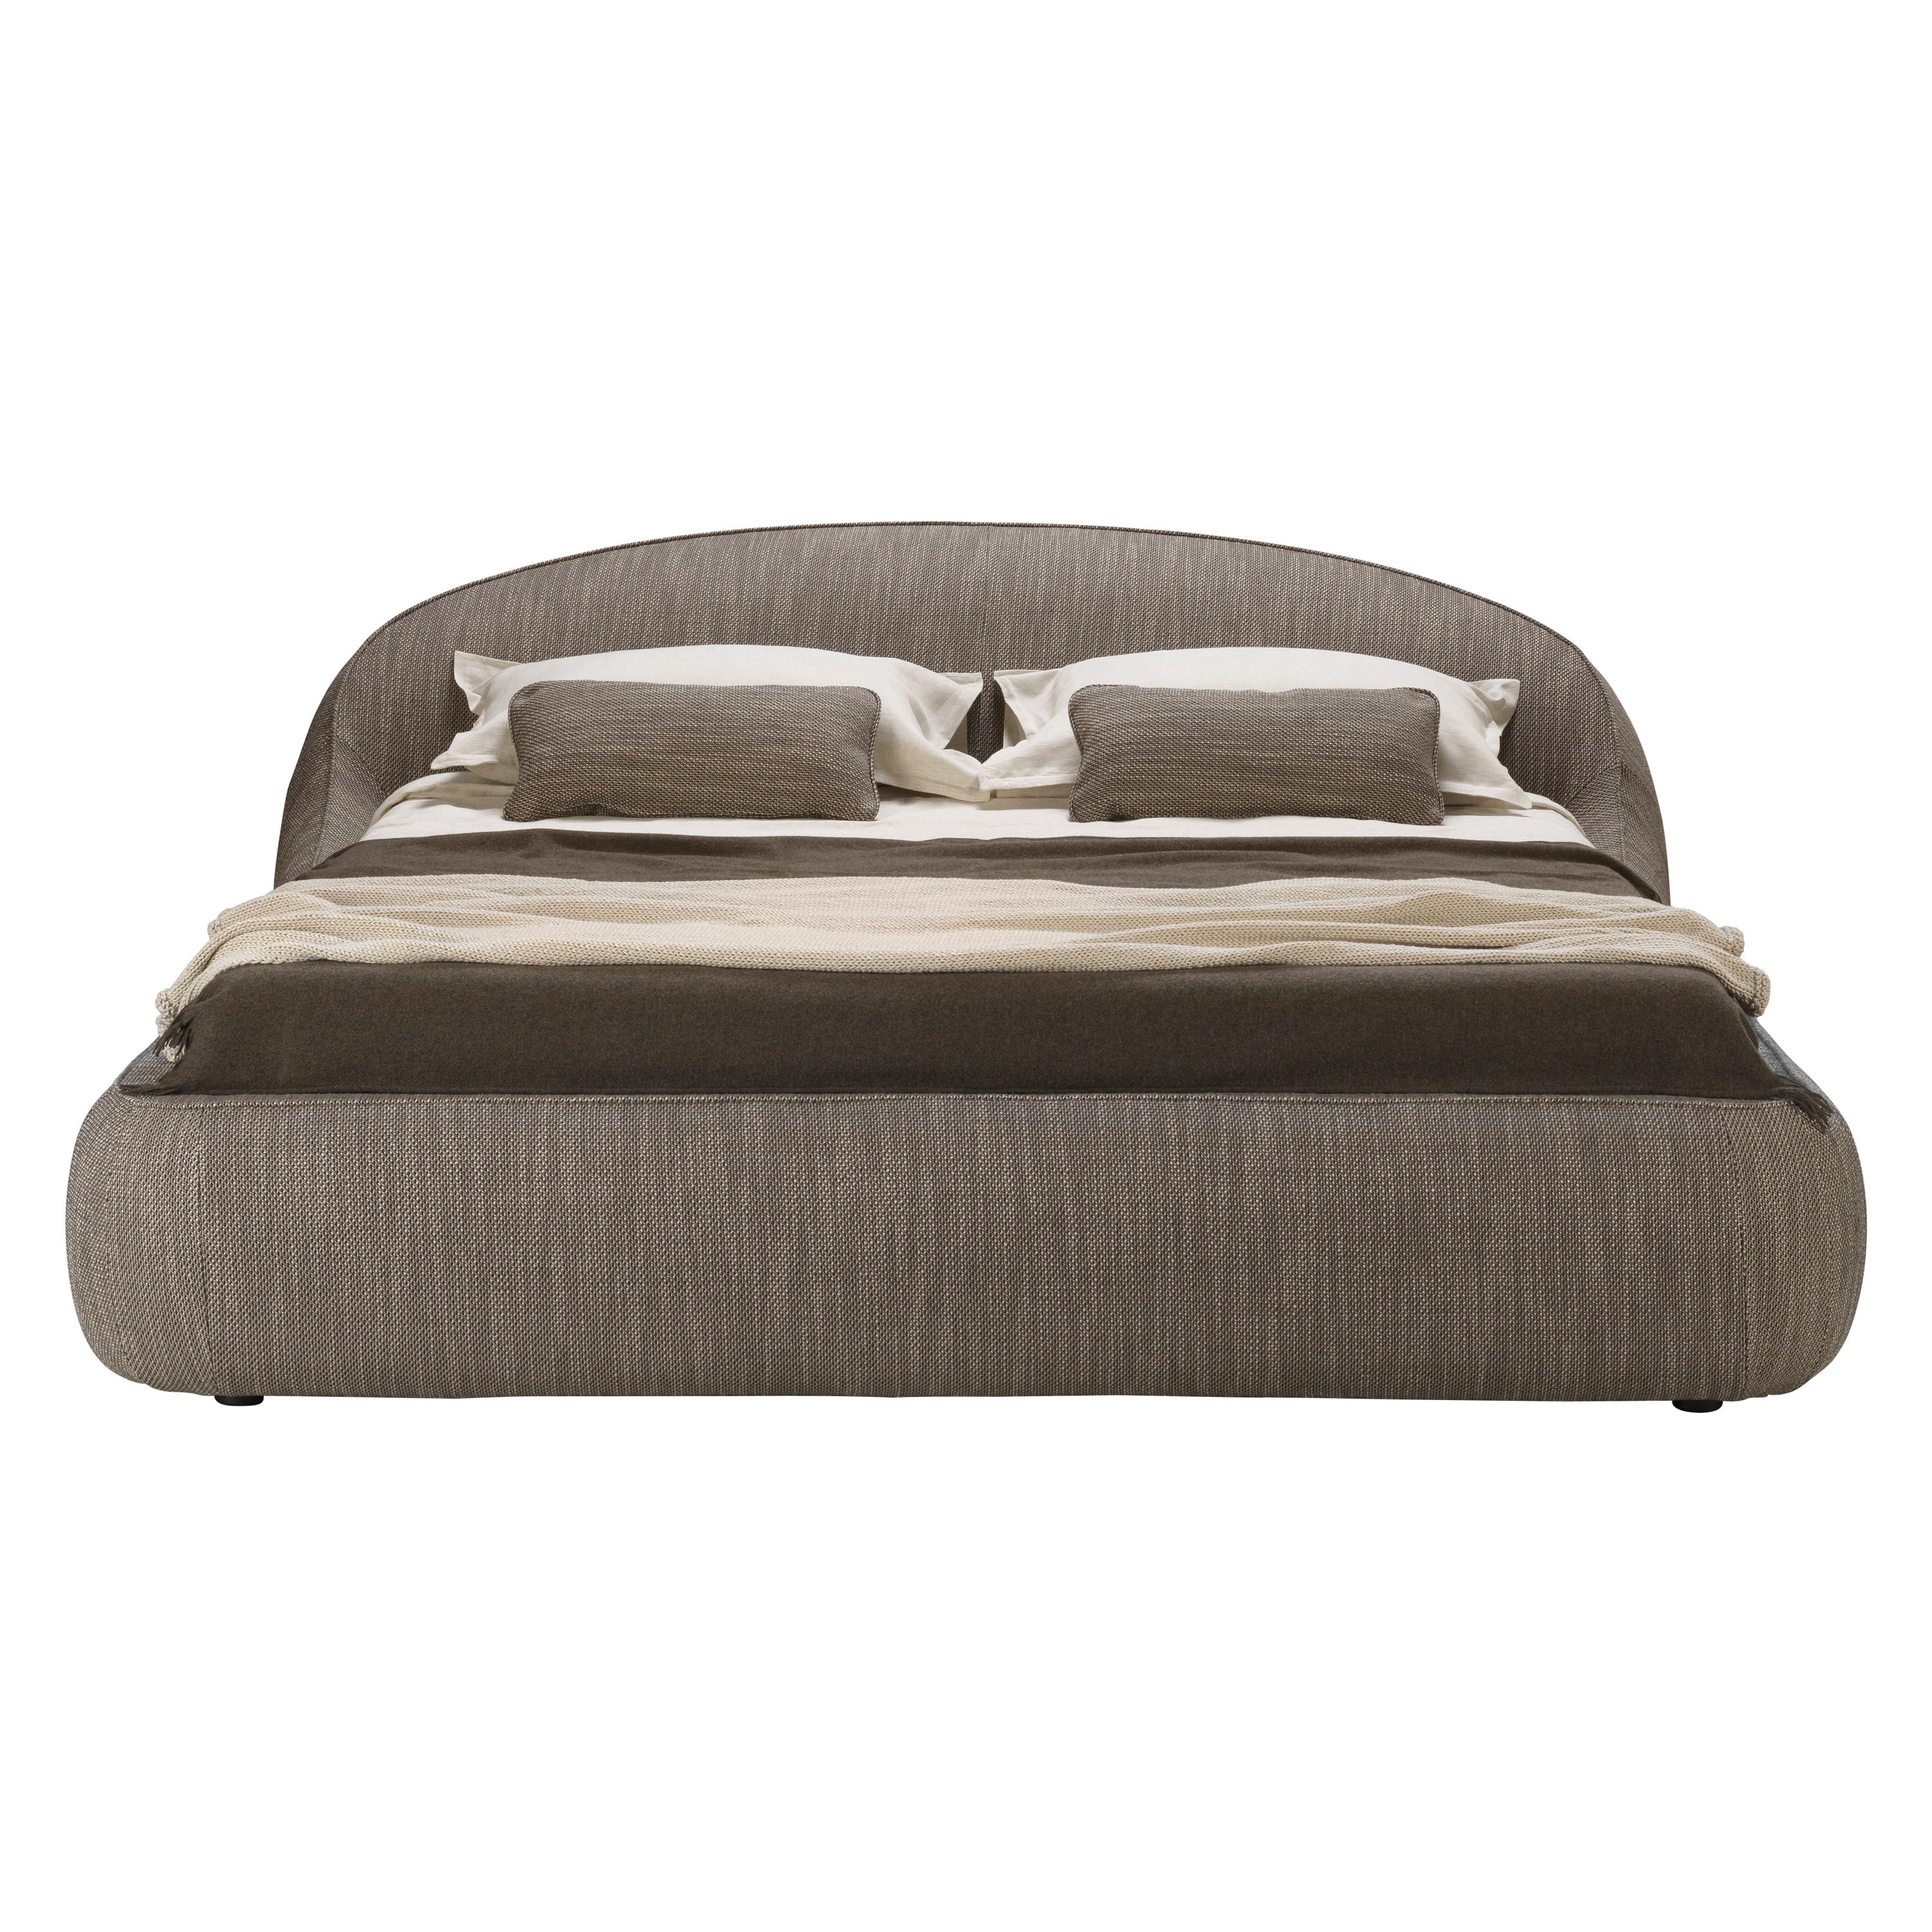 Abbracci Bed, Bed in Fabric Bogardine, Taupe Colour, Made in Italy For Sale